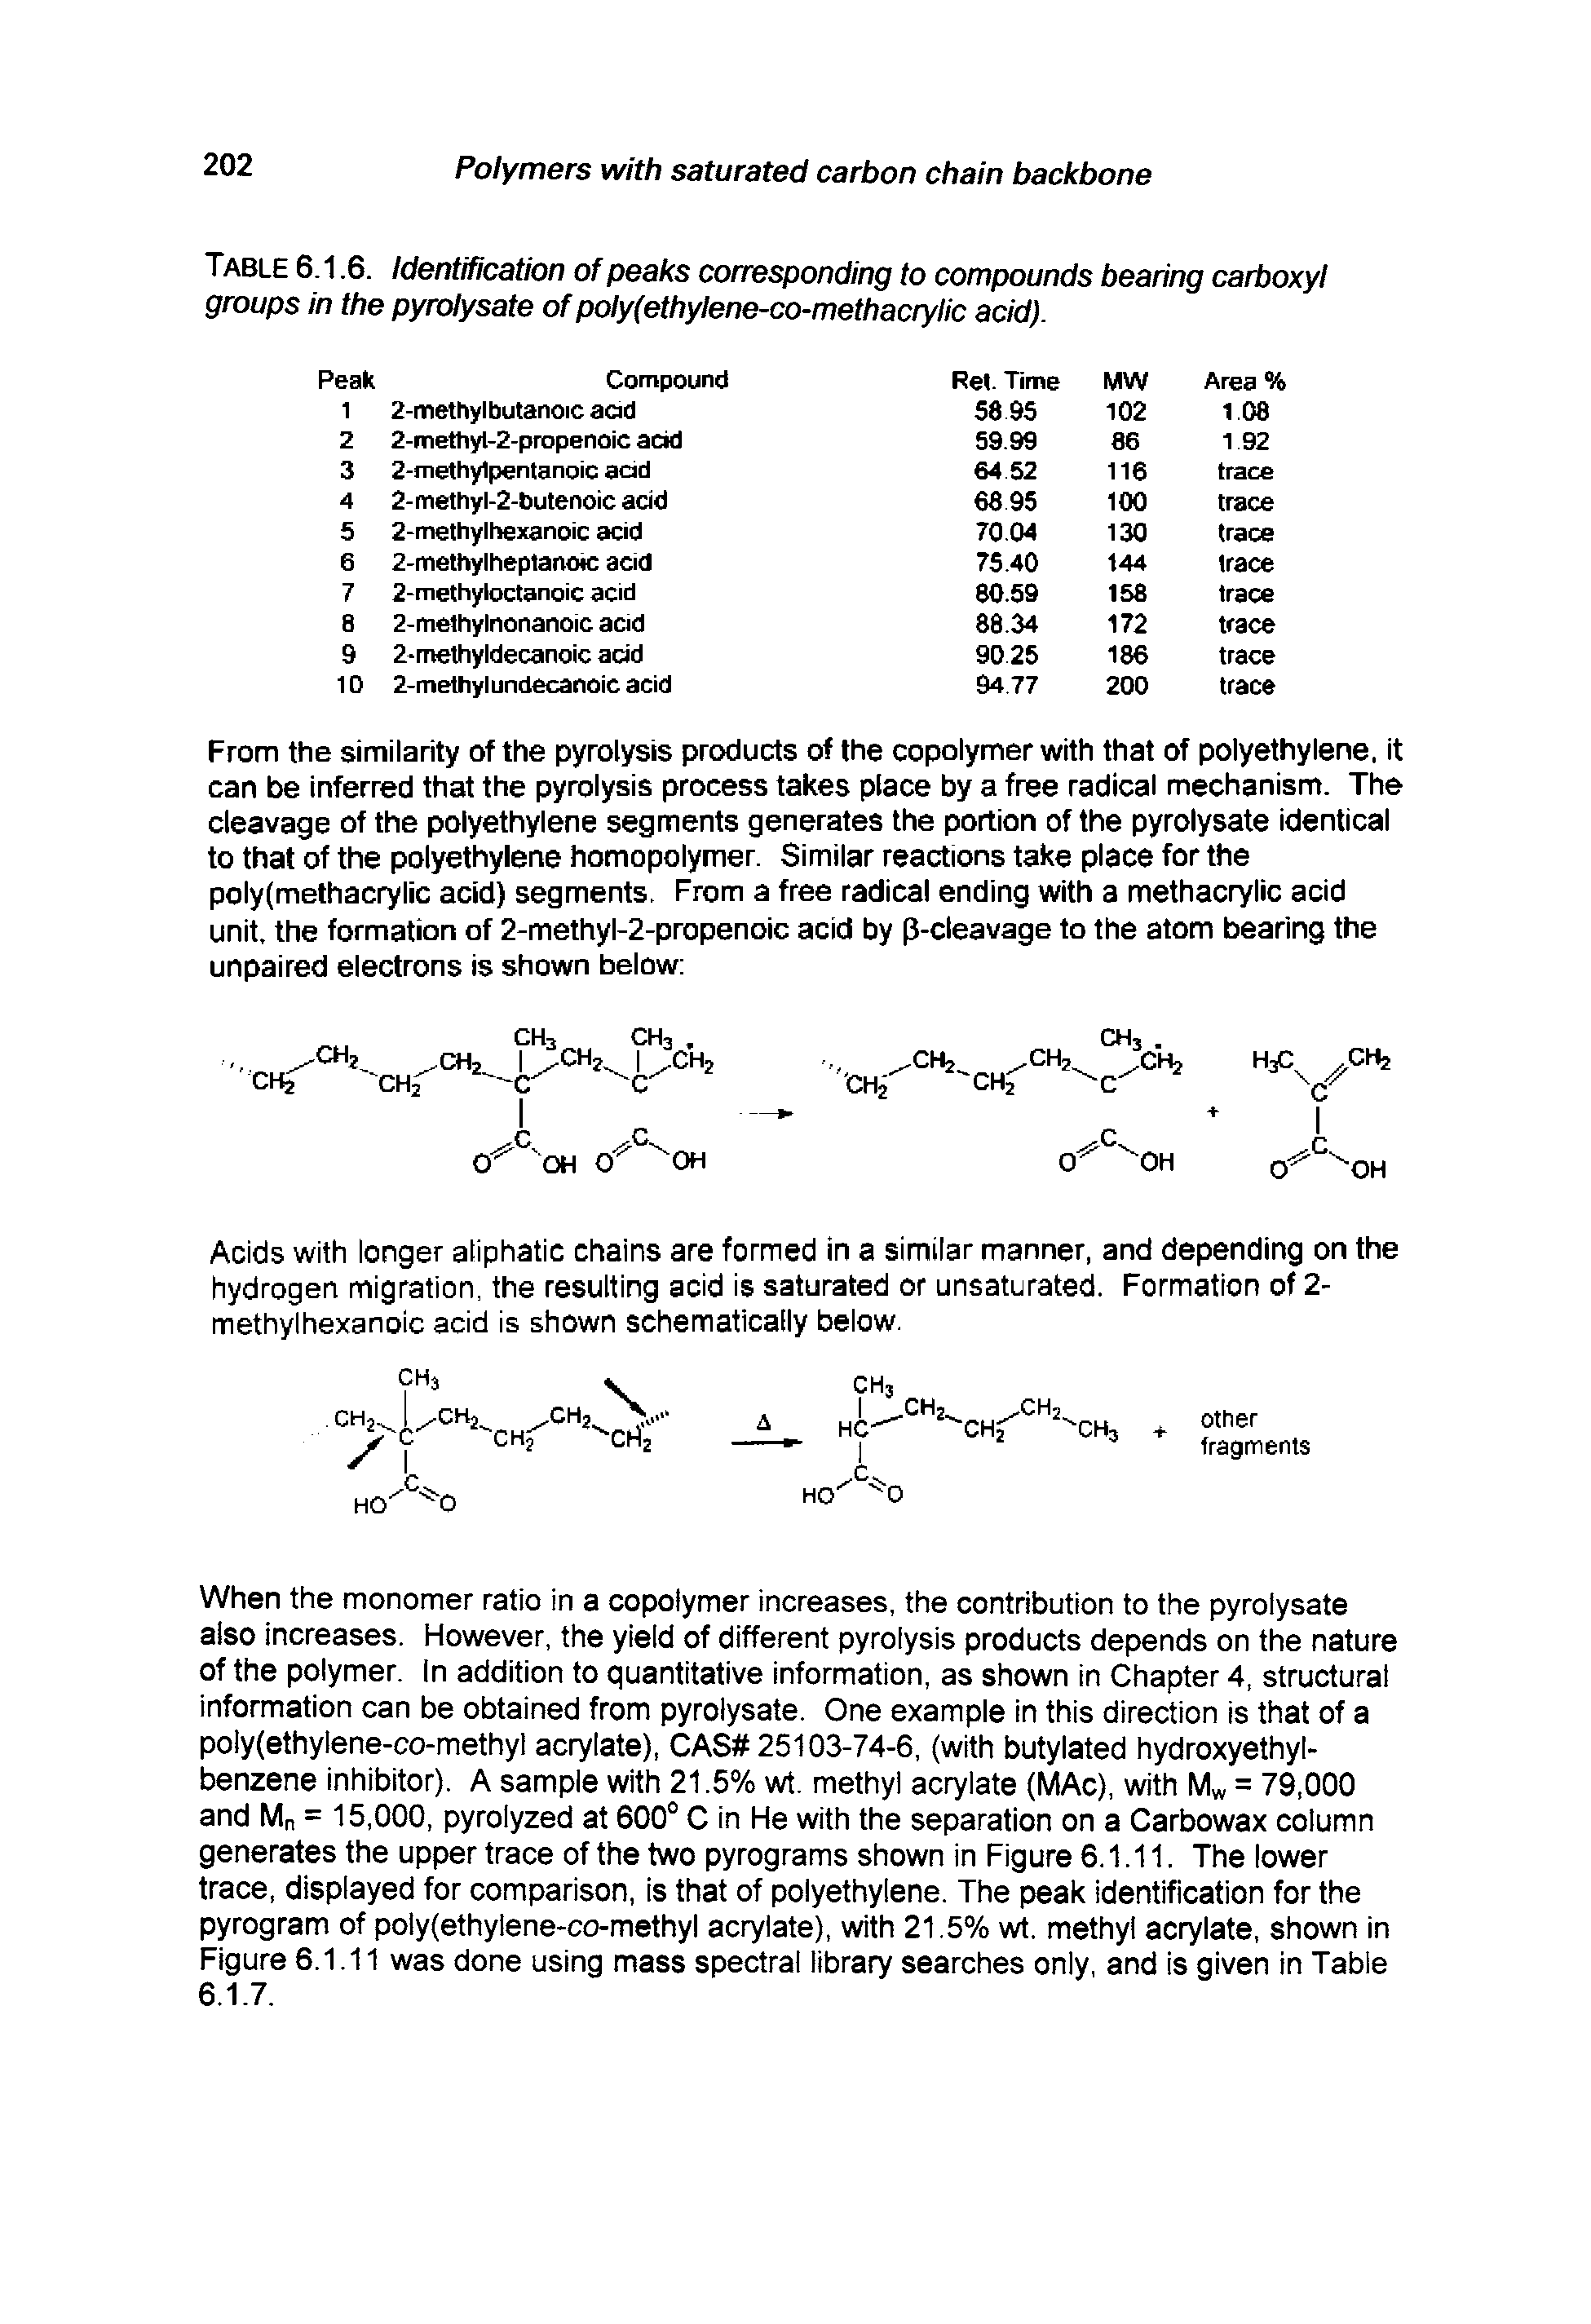 Table 6.1.6. Identification of peaks corresponding to compounds bearing carboxyl groups in the pyrolysate of poly(ethylene-co-methacrylic acid).